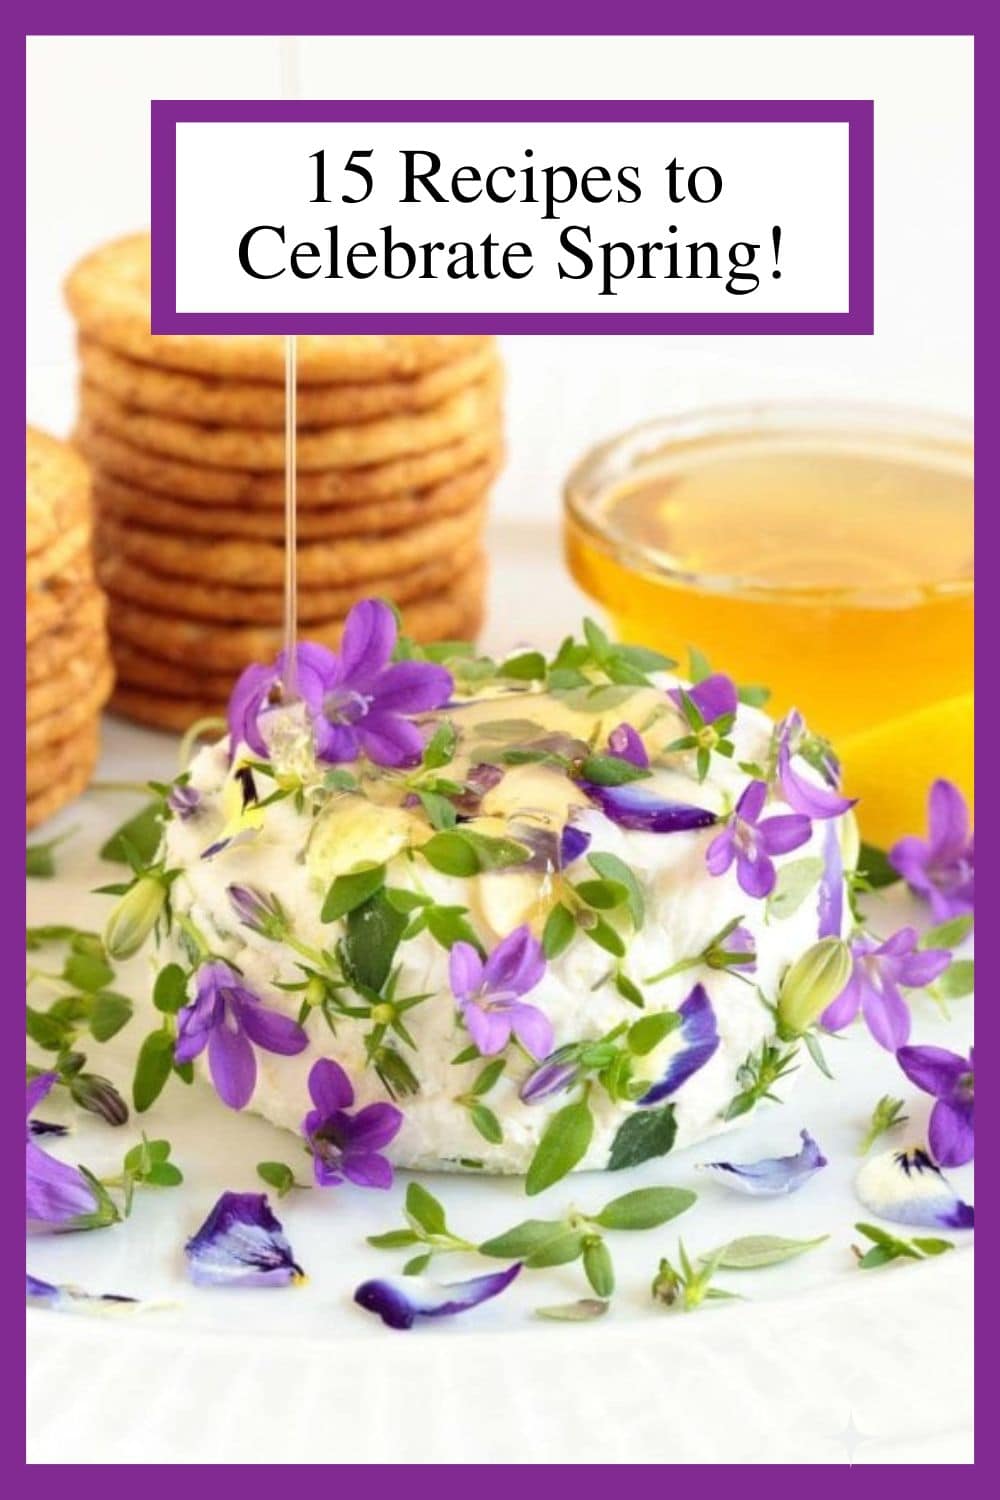 Welcome Spring! 15 Fresh, Delicious Recipes to Herald In the Season!